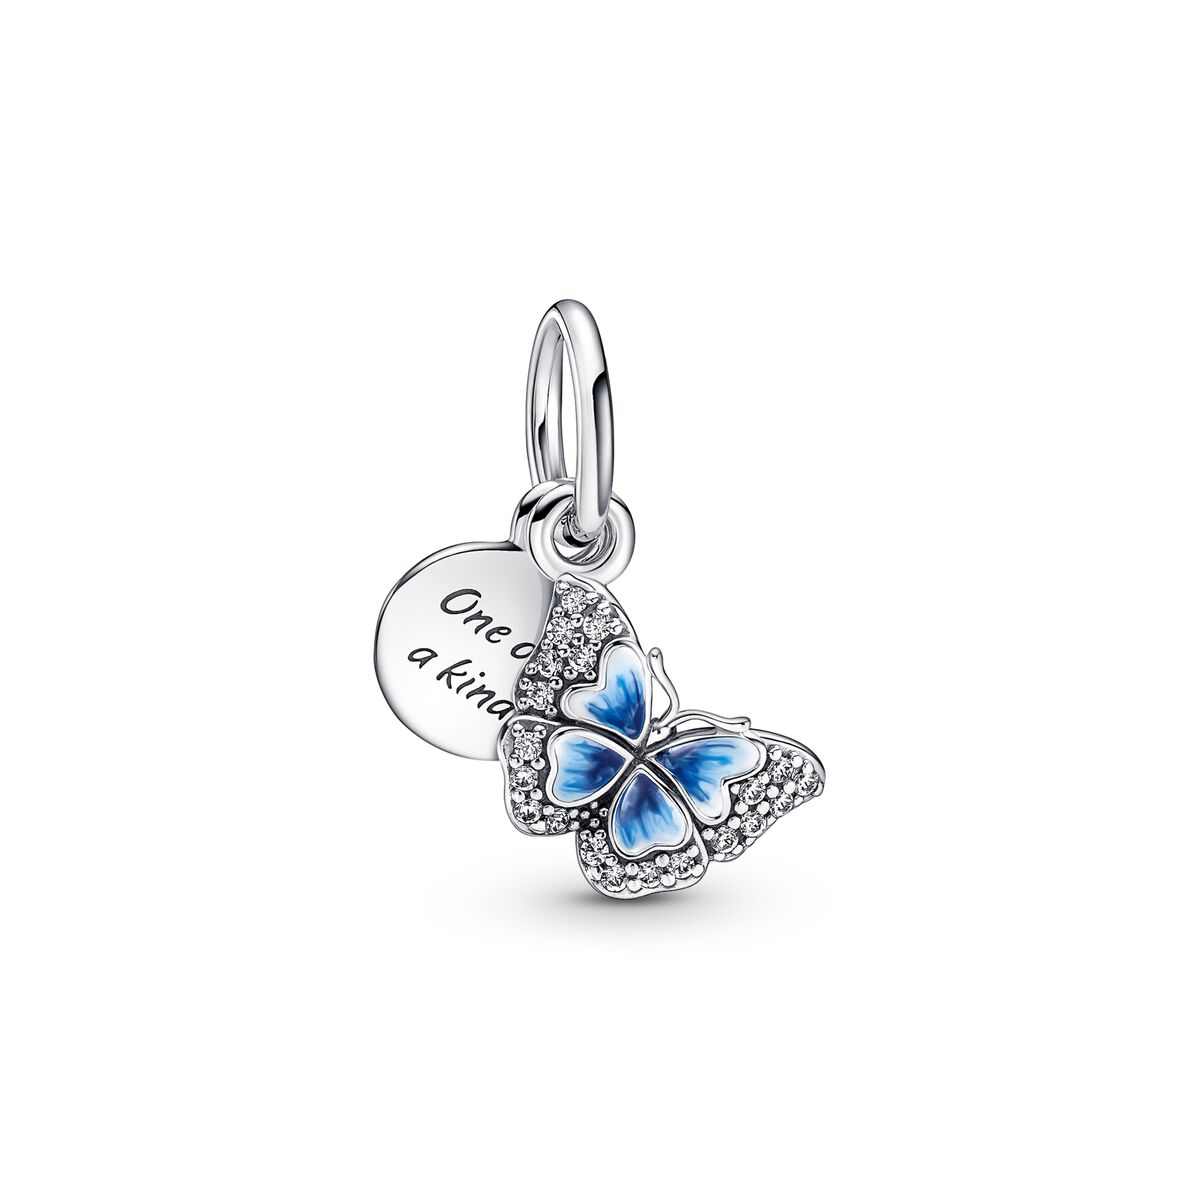 Pandora Charm Pendente Farfalla Blu - Emaille / Argento Sterling 925 / Zirconia Cubica product